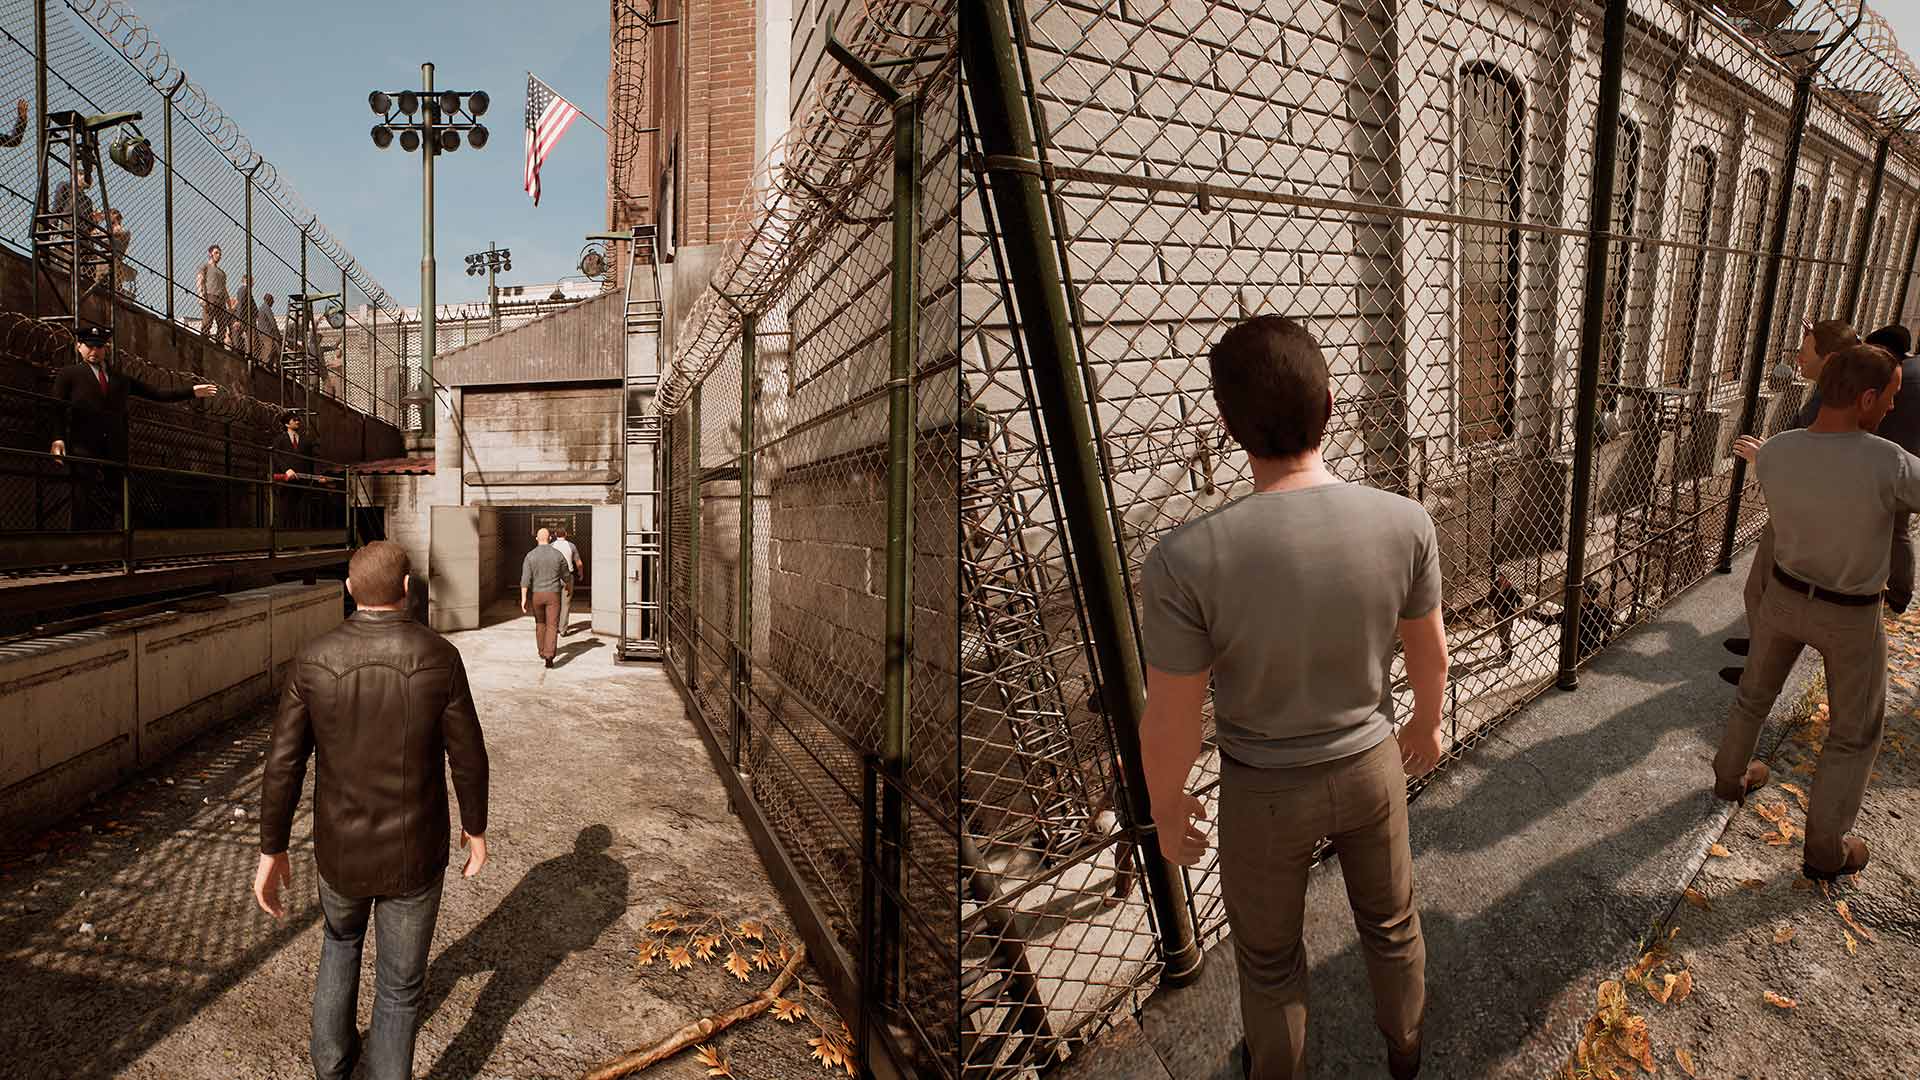 a way out playstation 4